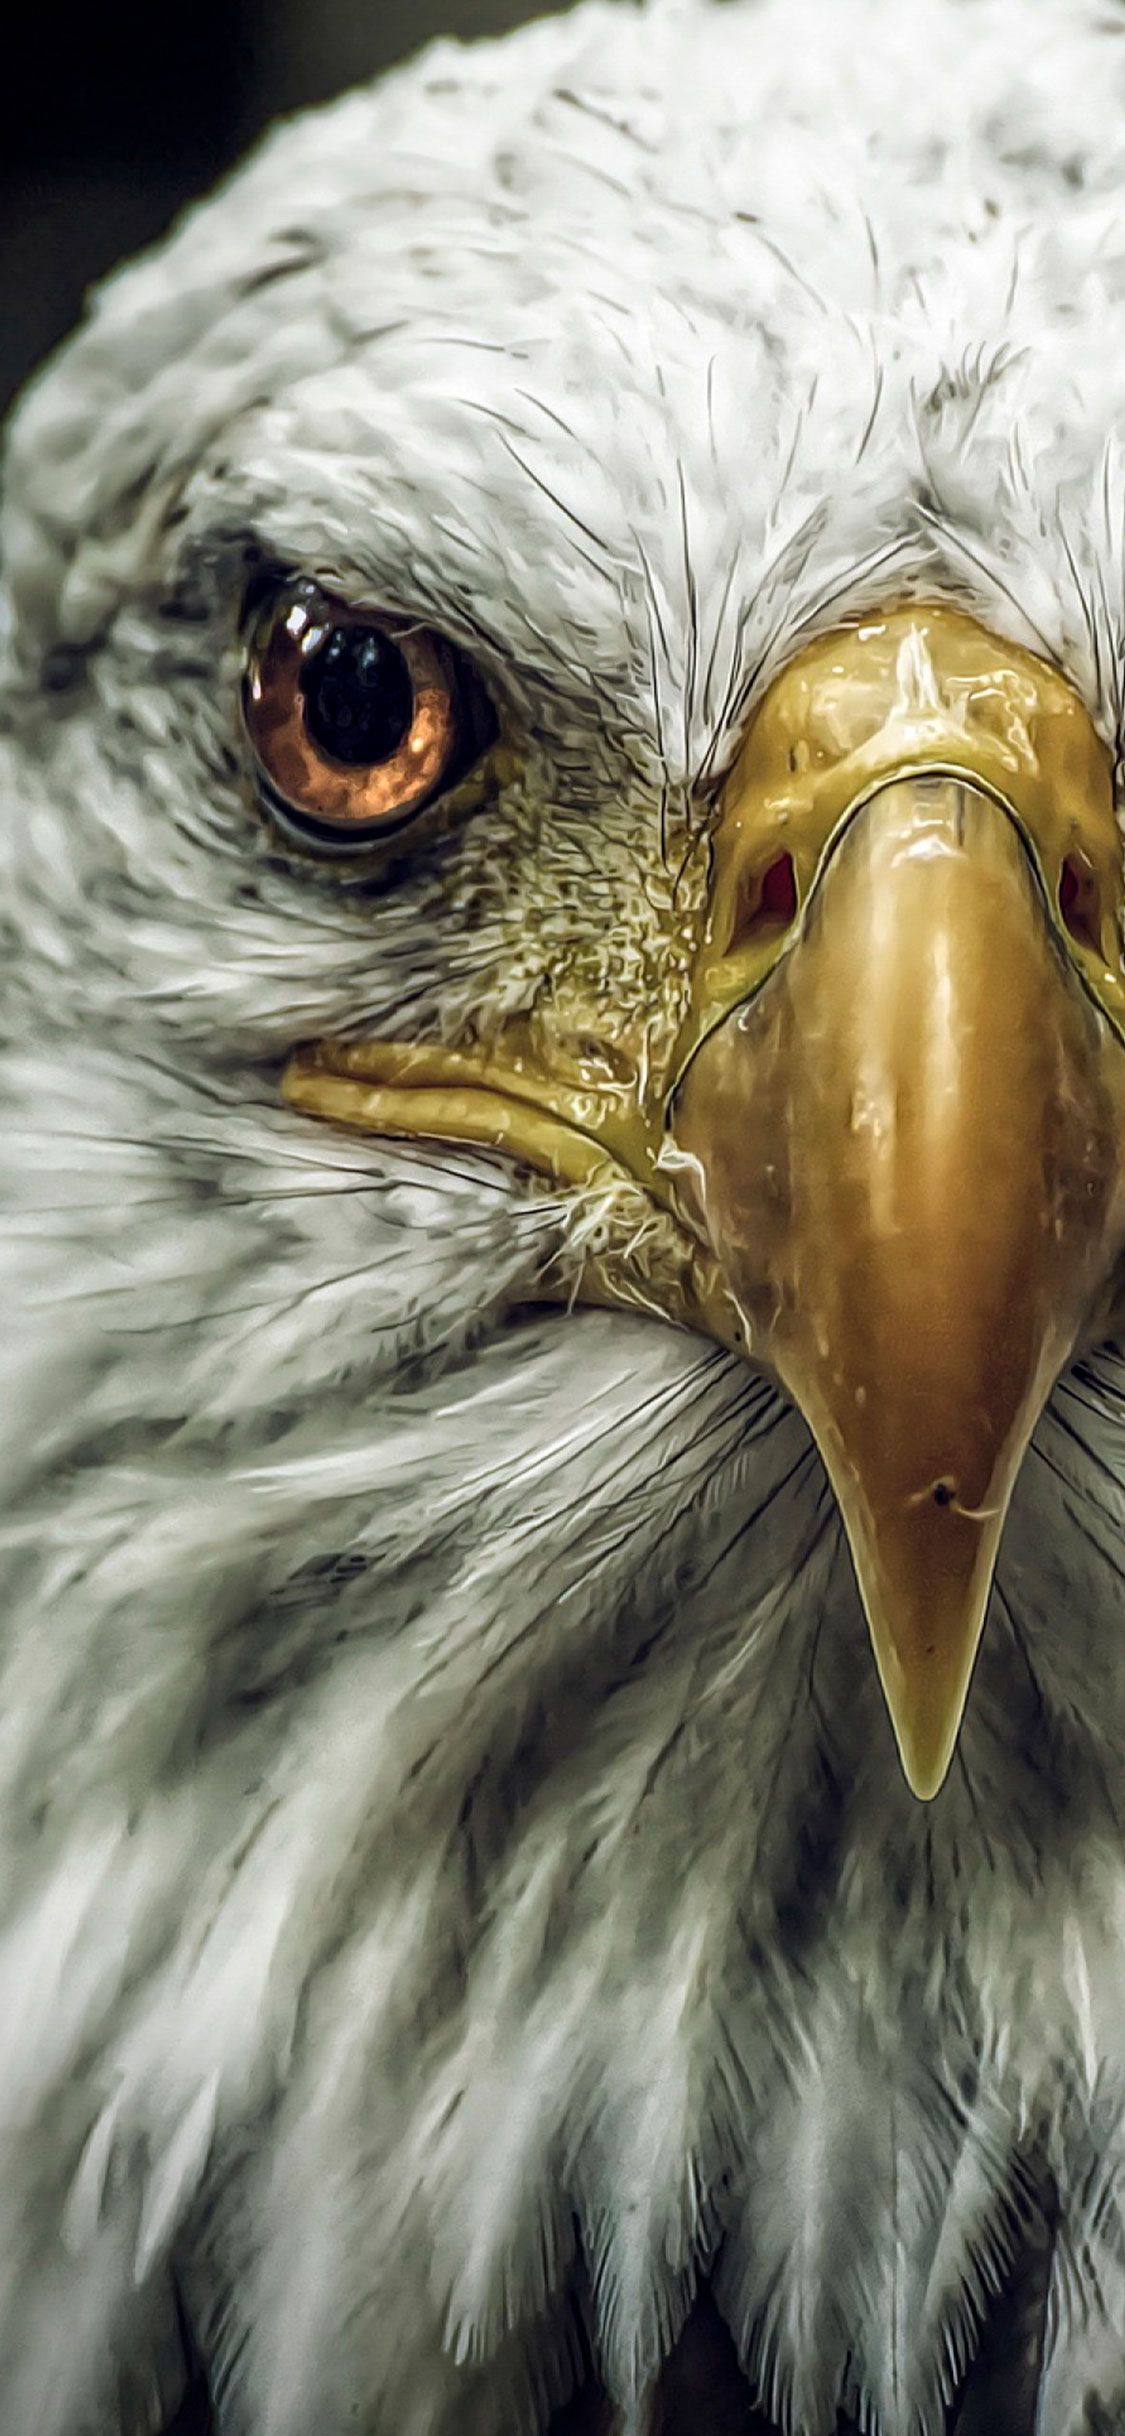 Eagle Face iPhone Wallpaper HD  iPhone Wallpapers  iPhone Wallpapers